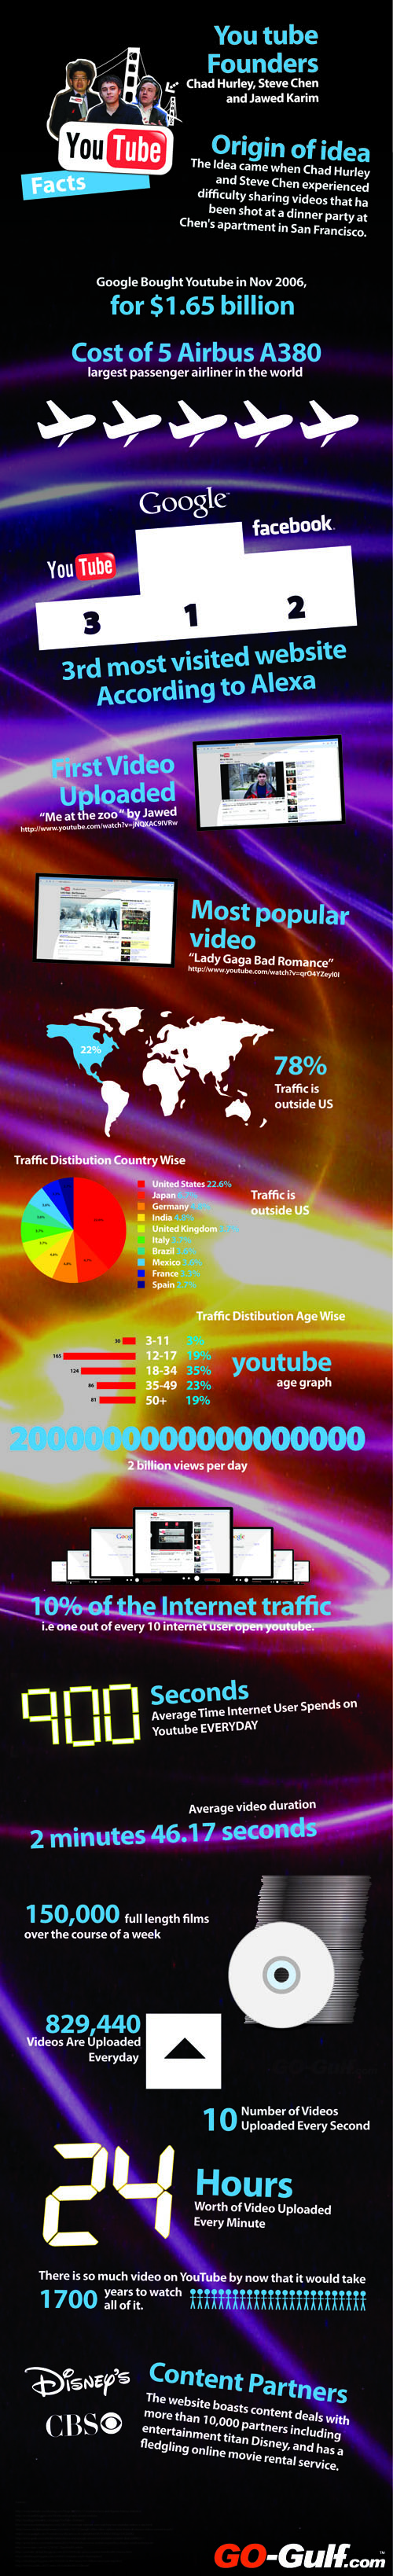 20 Facts About YouTube Service